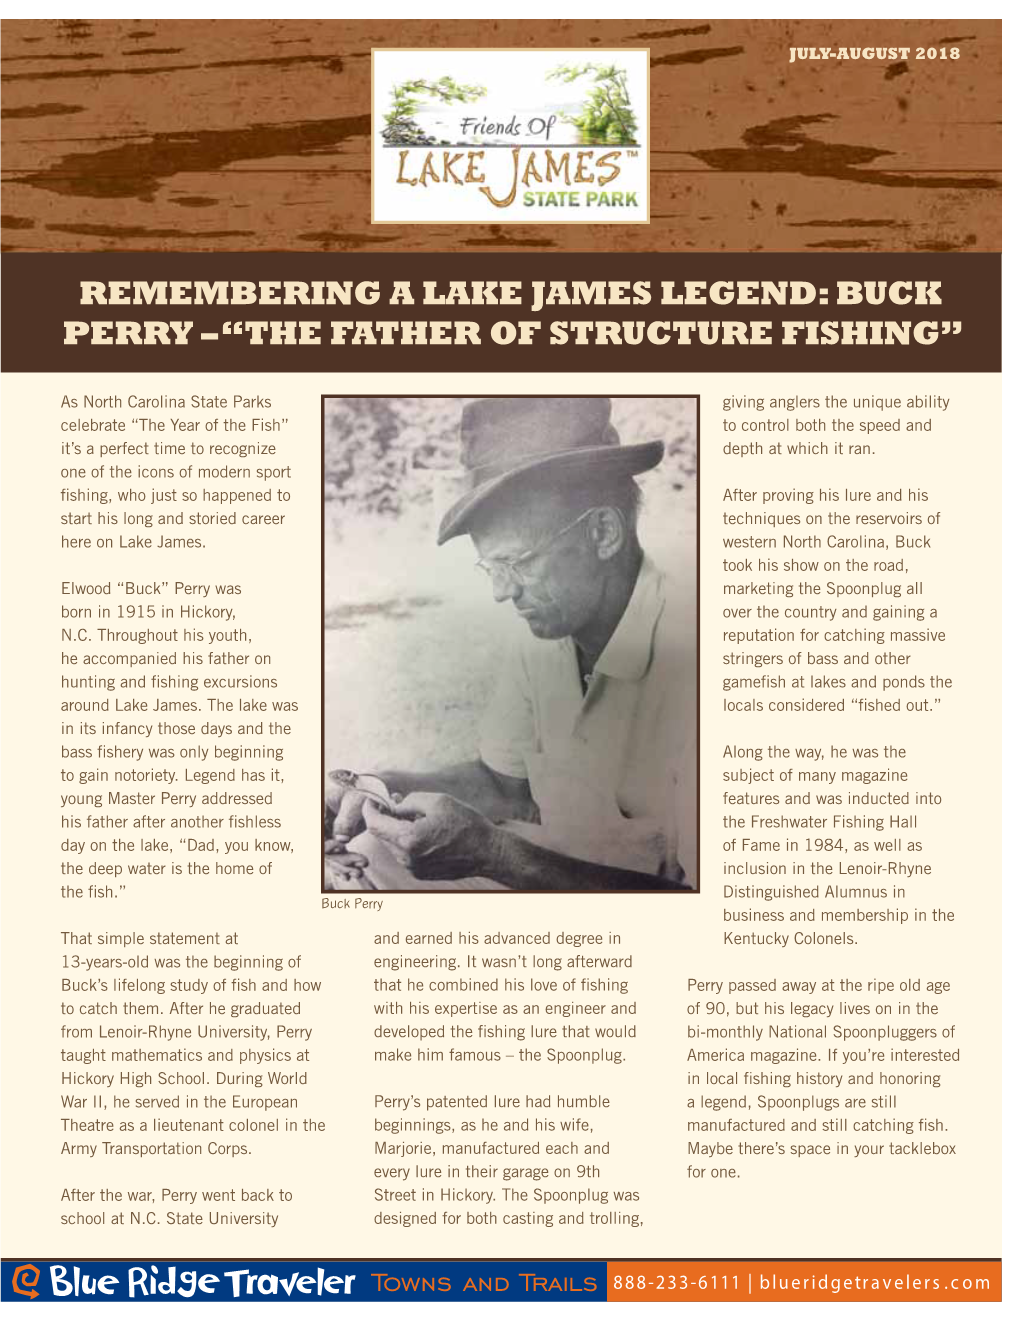 Buck Perry – “The Father of Structure Fishing”